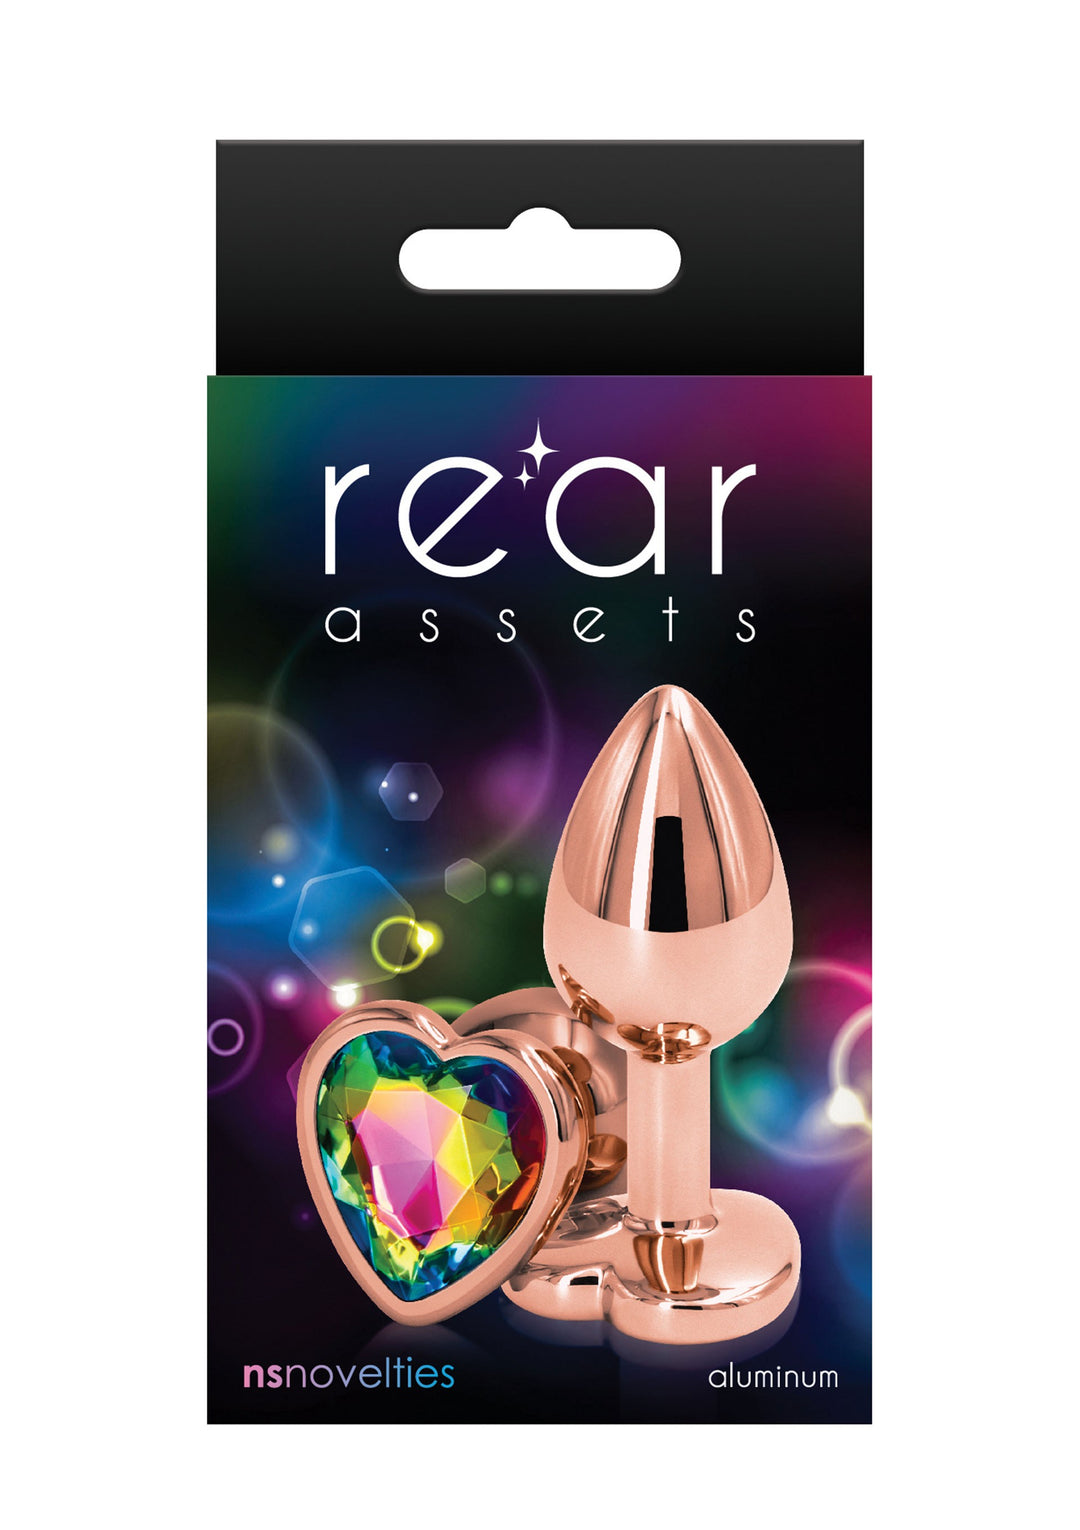 Rose Gold Heart S anal plug